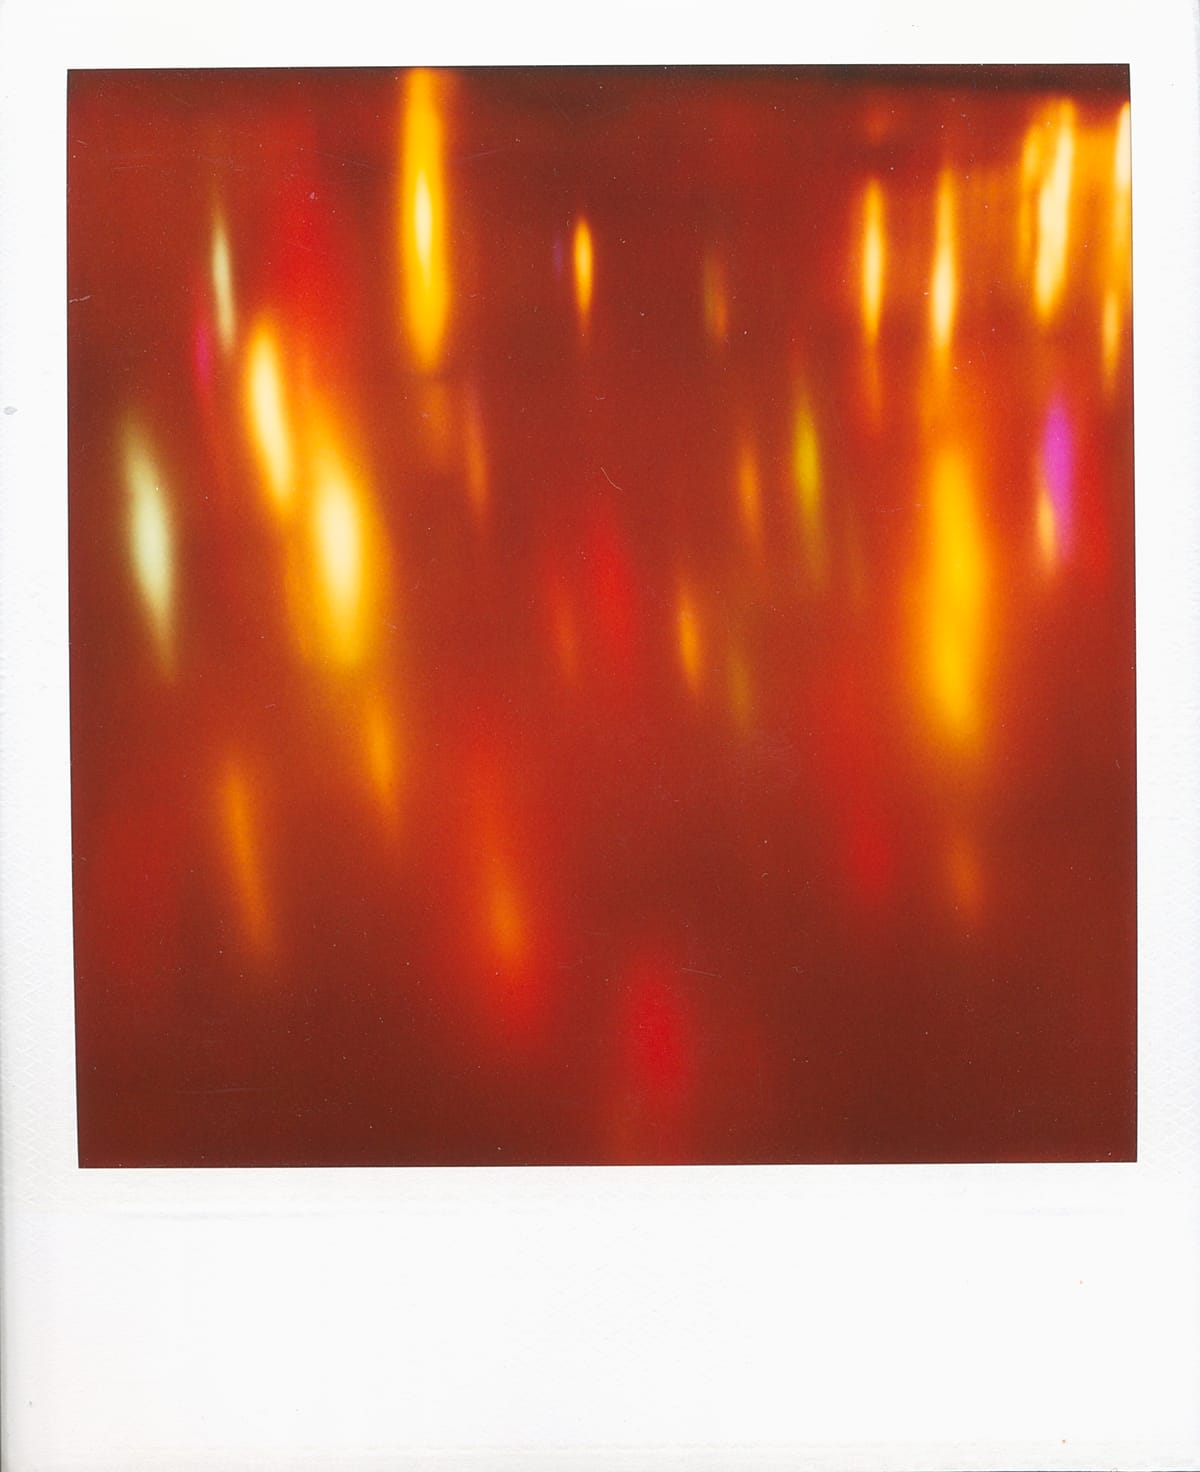 Scan of a Polaroid of a dreamy abstract image of Christmas lights reflecting off of a surface